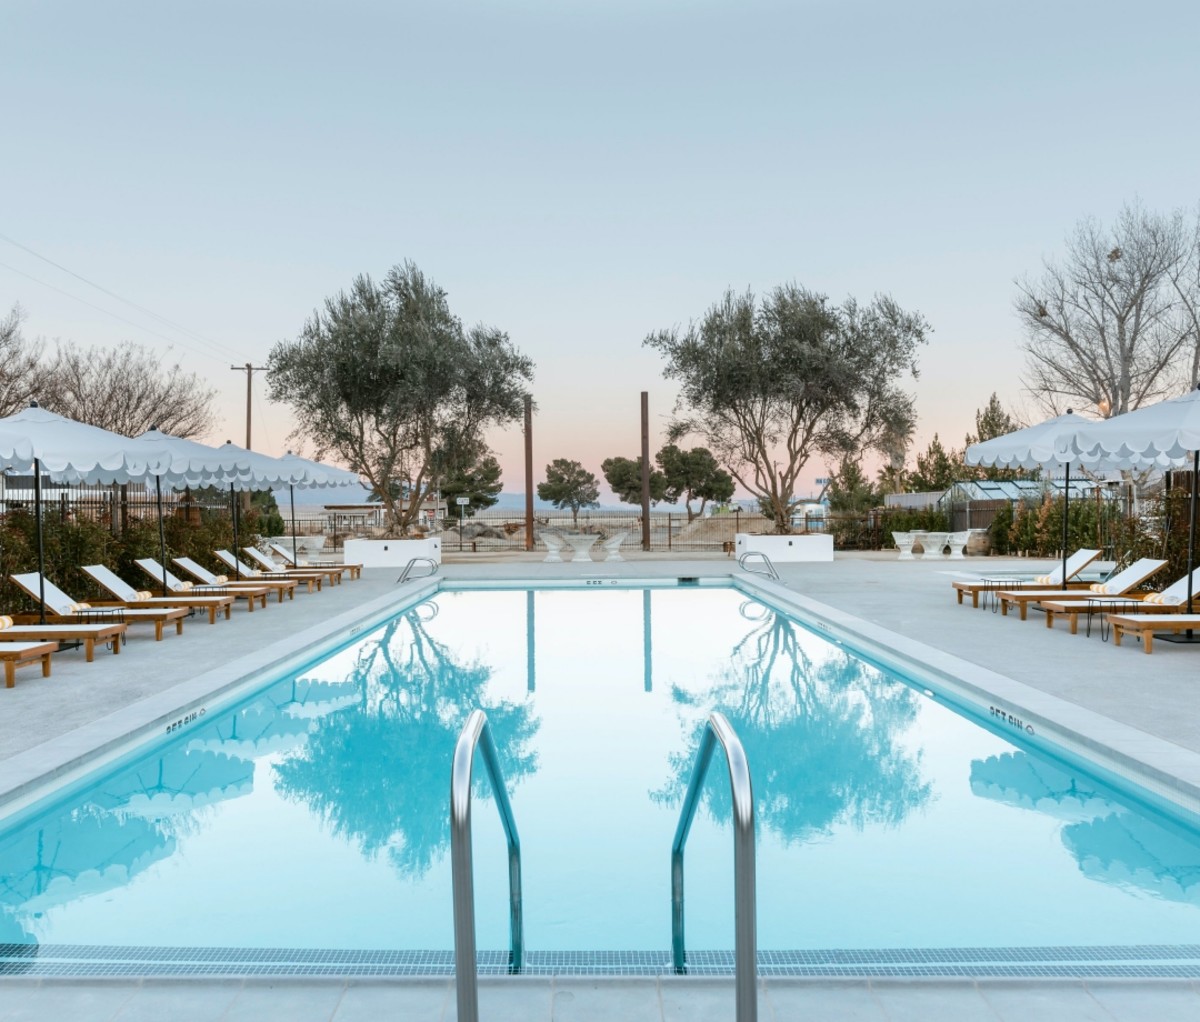 The pool at the Cuyama Buckhorn hotel